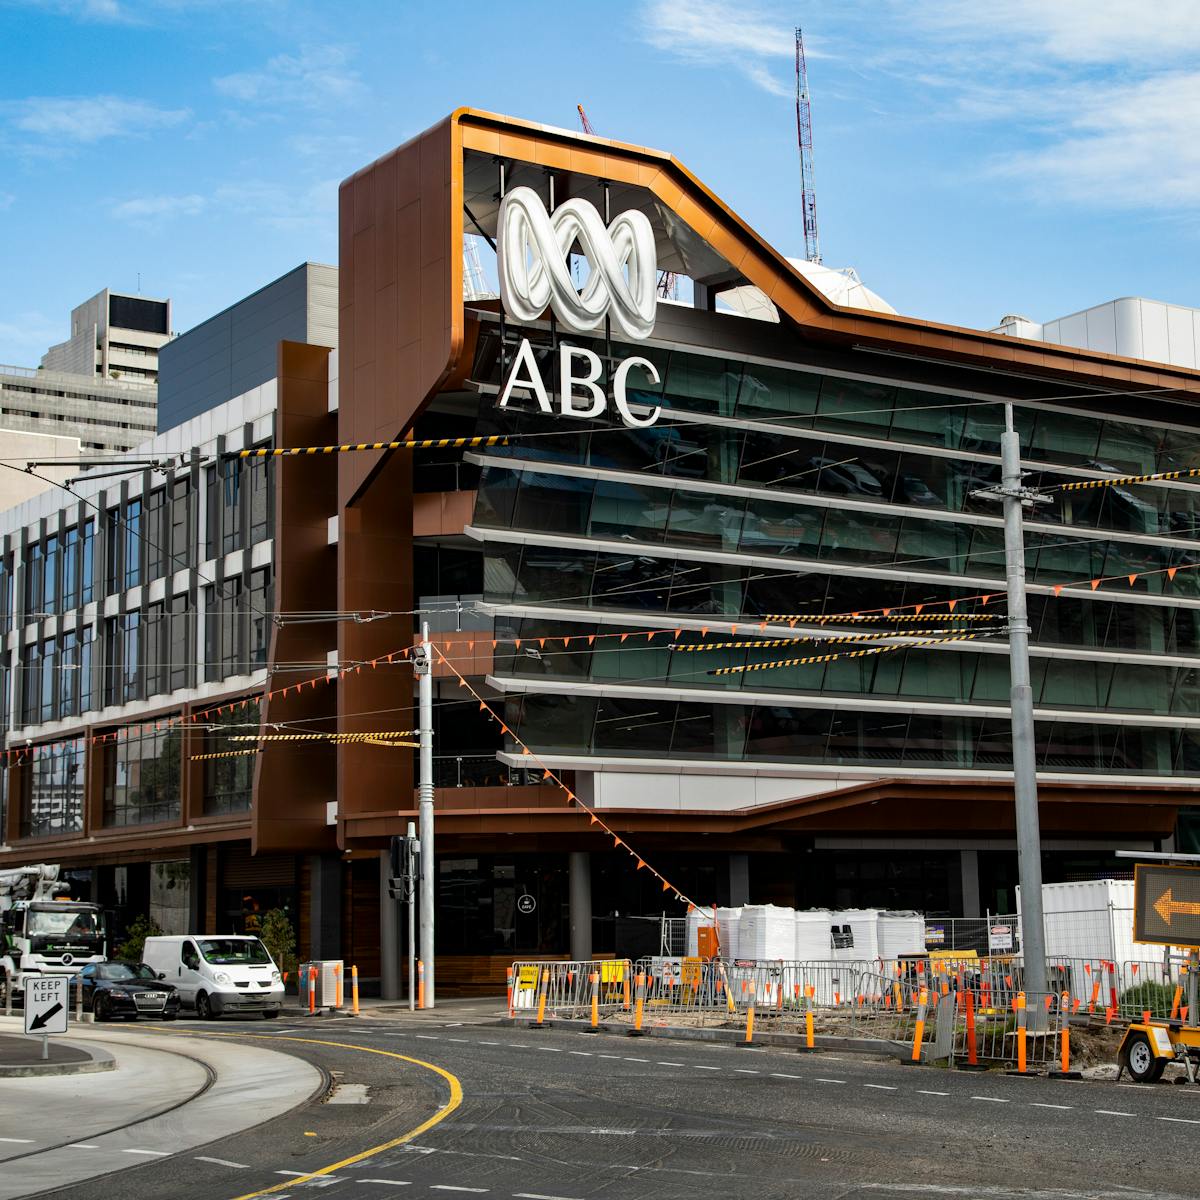 Latest 84 Million Cuts Rip The Heart Out Of The Abc And Our Democracy